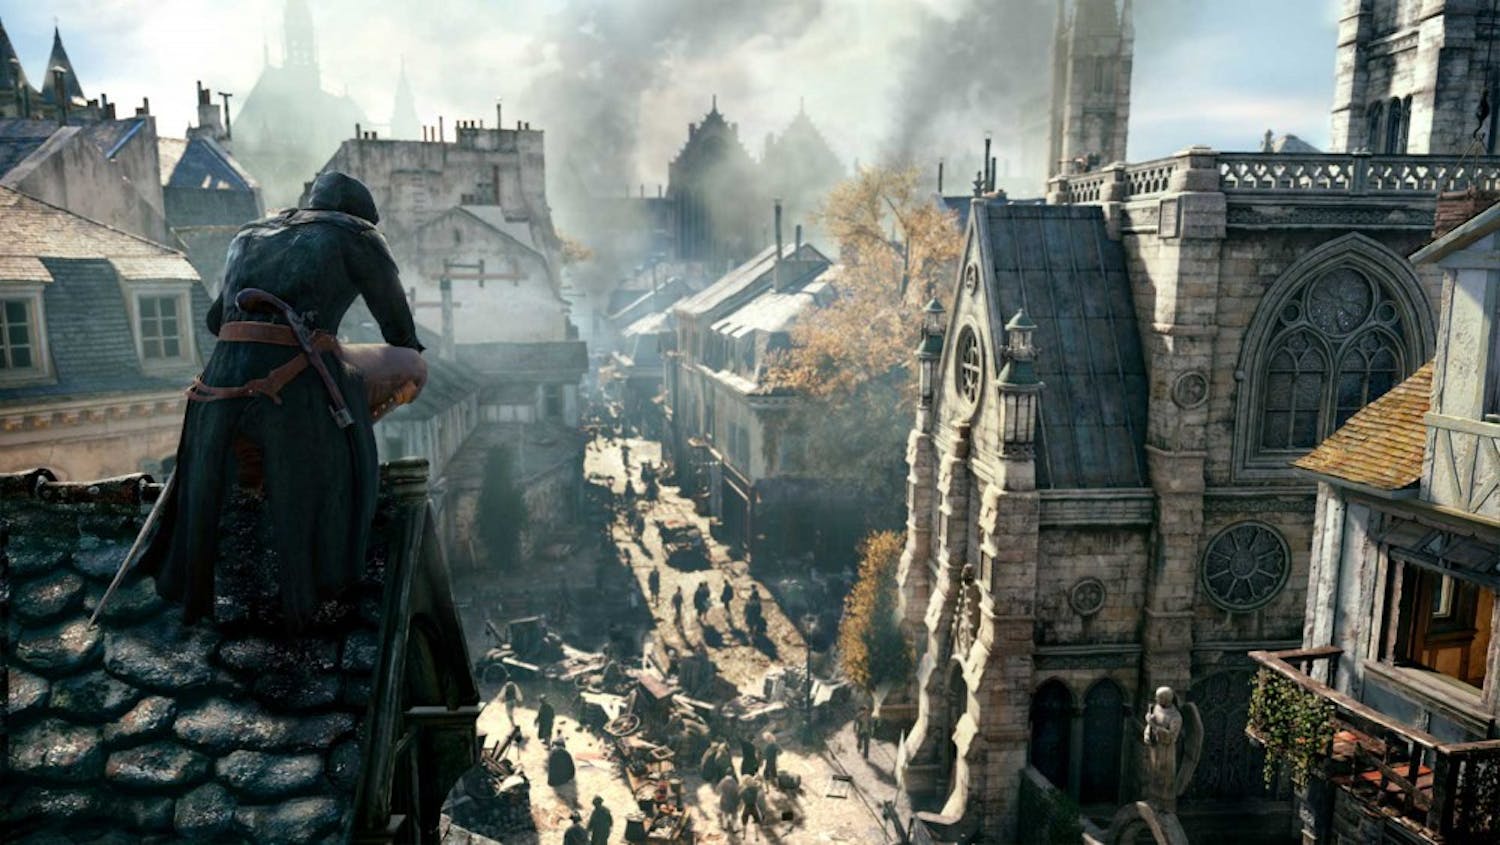 PLG-ASSASSINS-CREED-UNITY-REVIEW-1-MCT